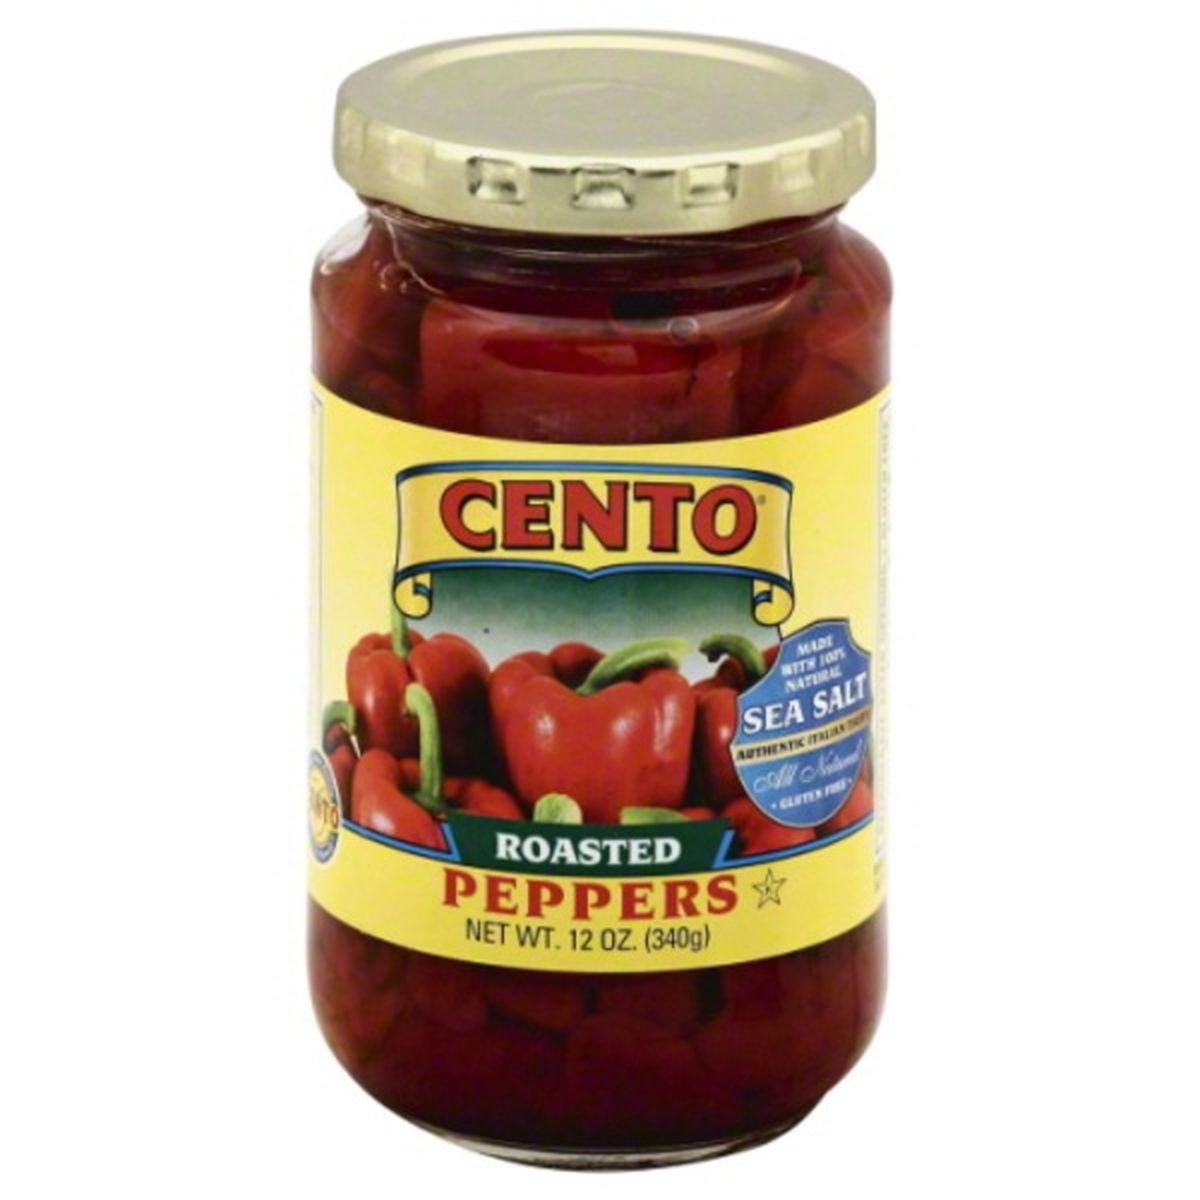 Calories in Cento Peppers, Roasted